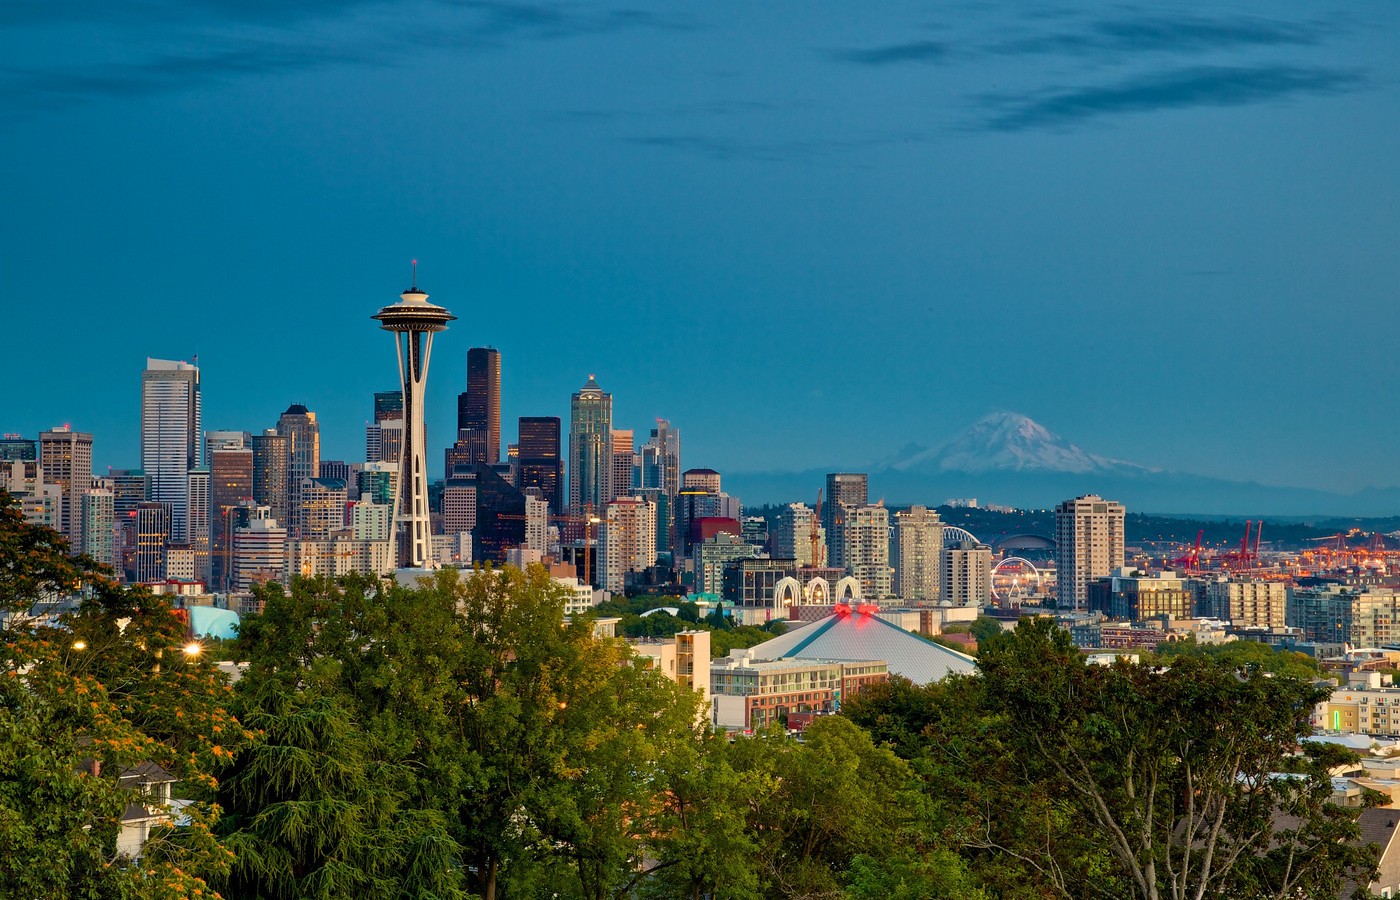 Sunday City Guide: What to do in Seattle